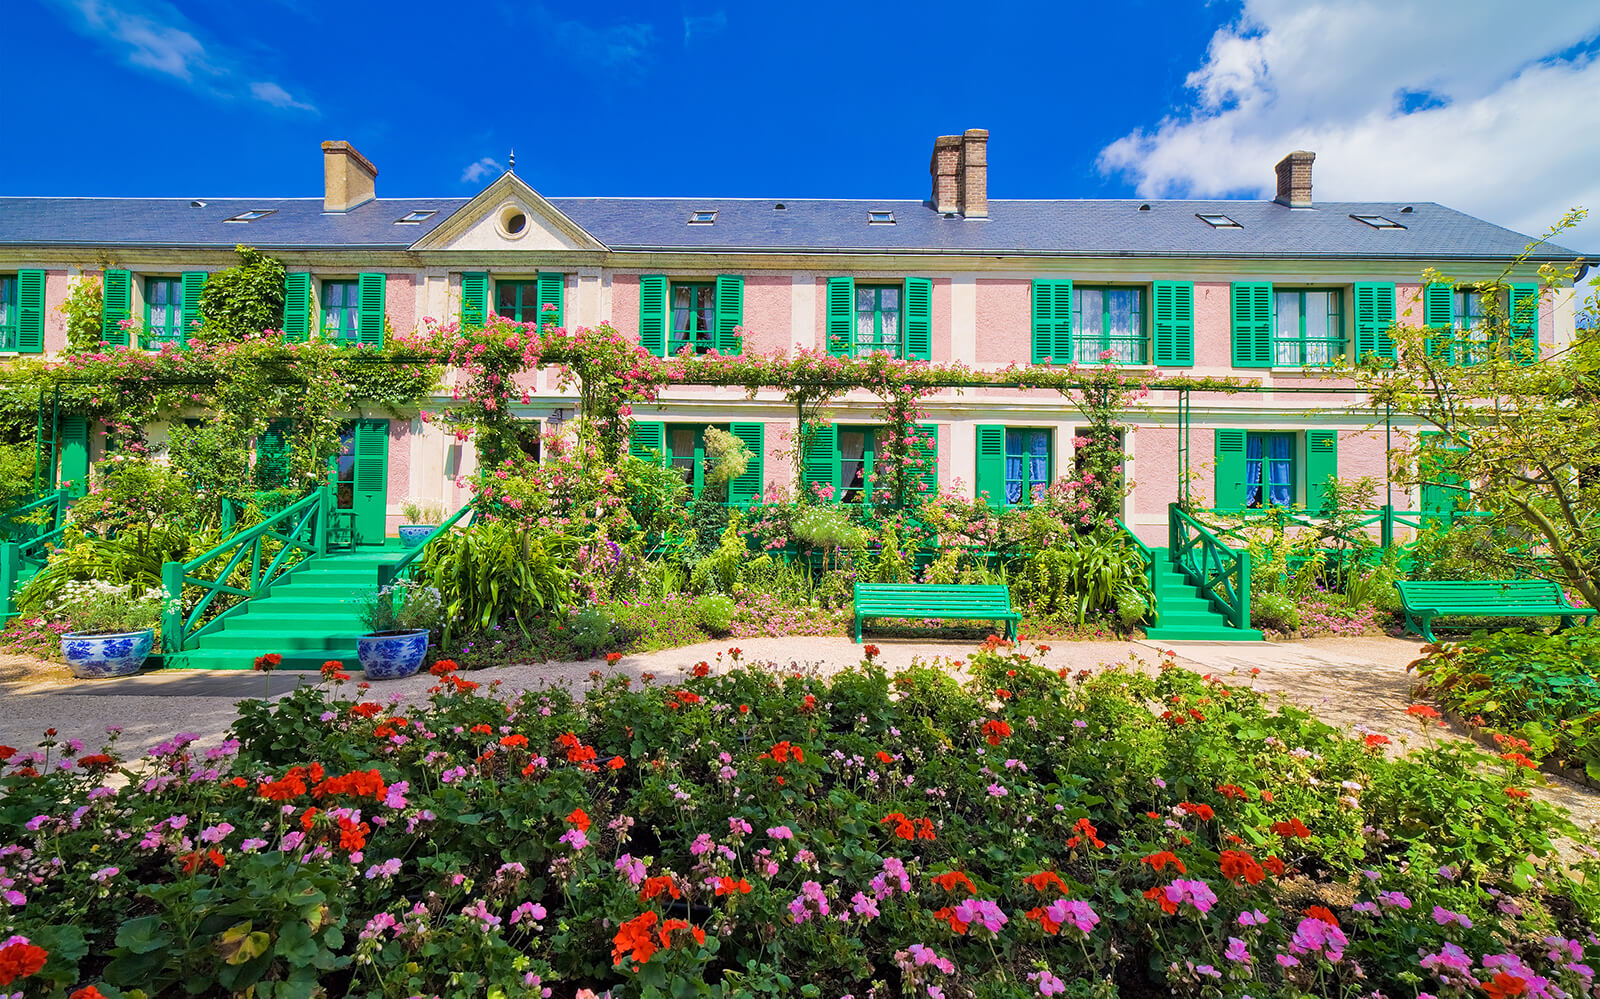 Image of Half Day Audio-Guided Tour of Giverny Monet's Gardens from Paris